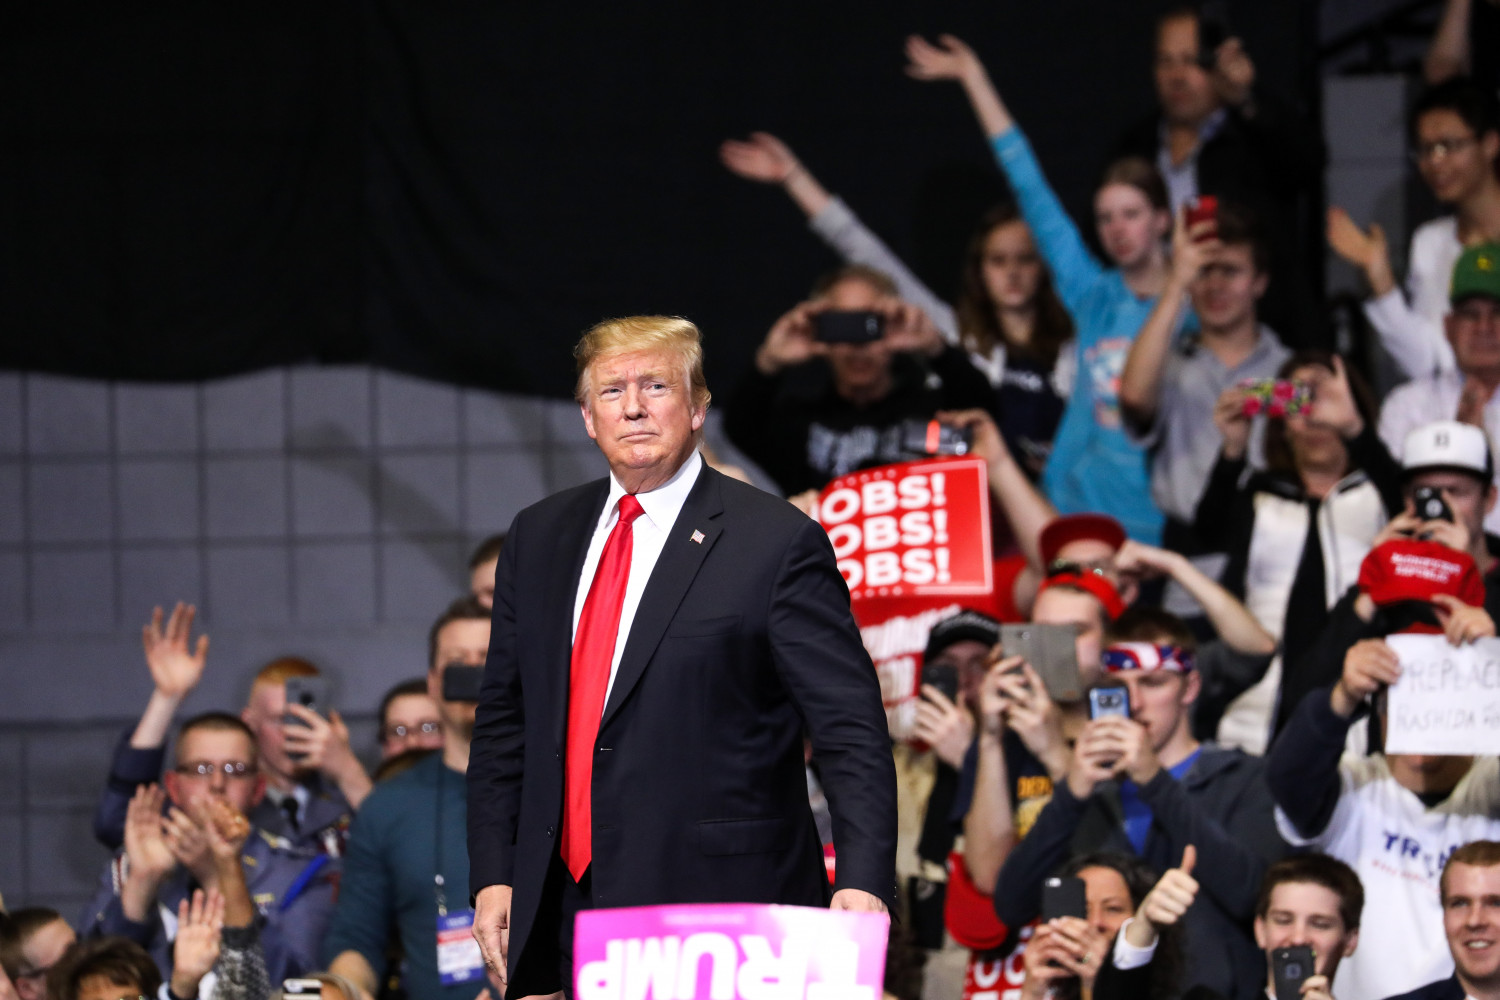 CNN Poll Shows Majority of People Think Trump Will Win in 2020